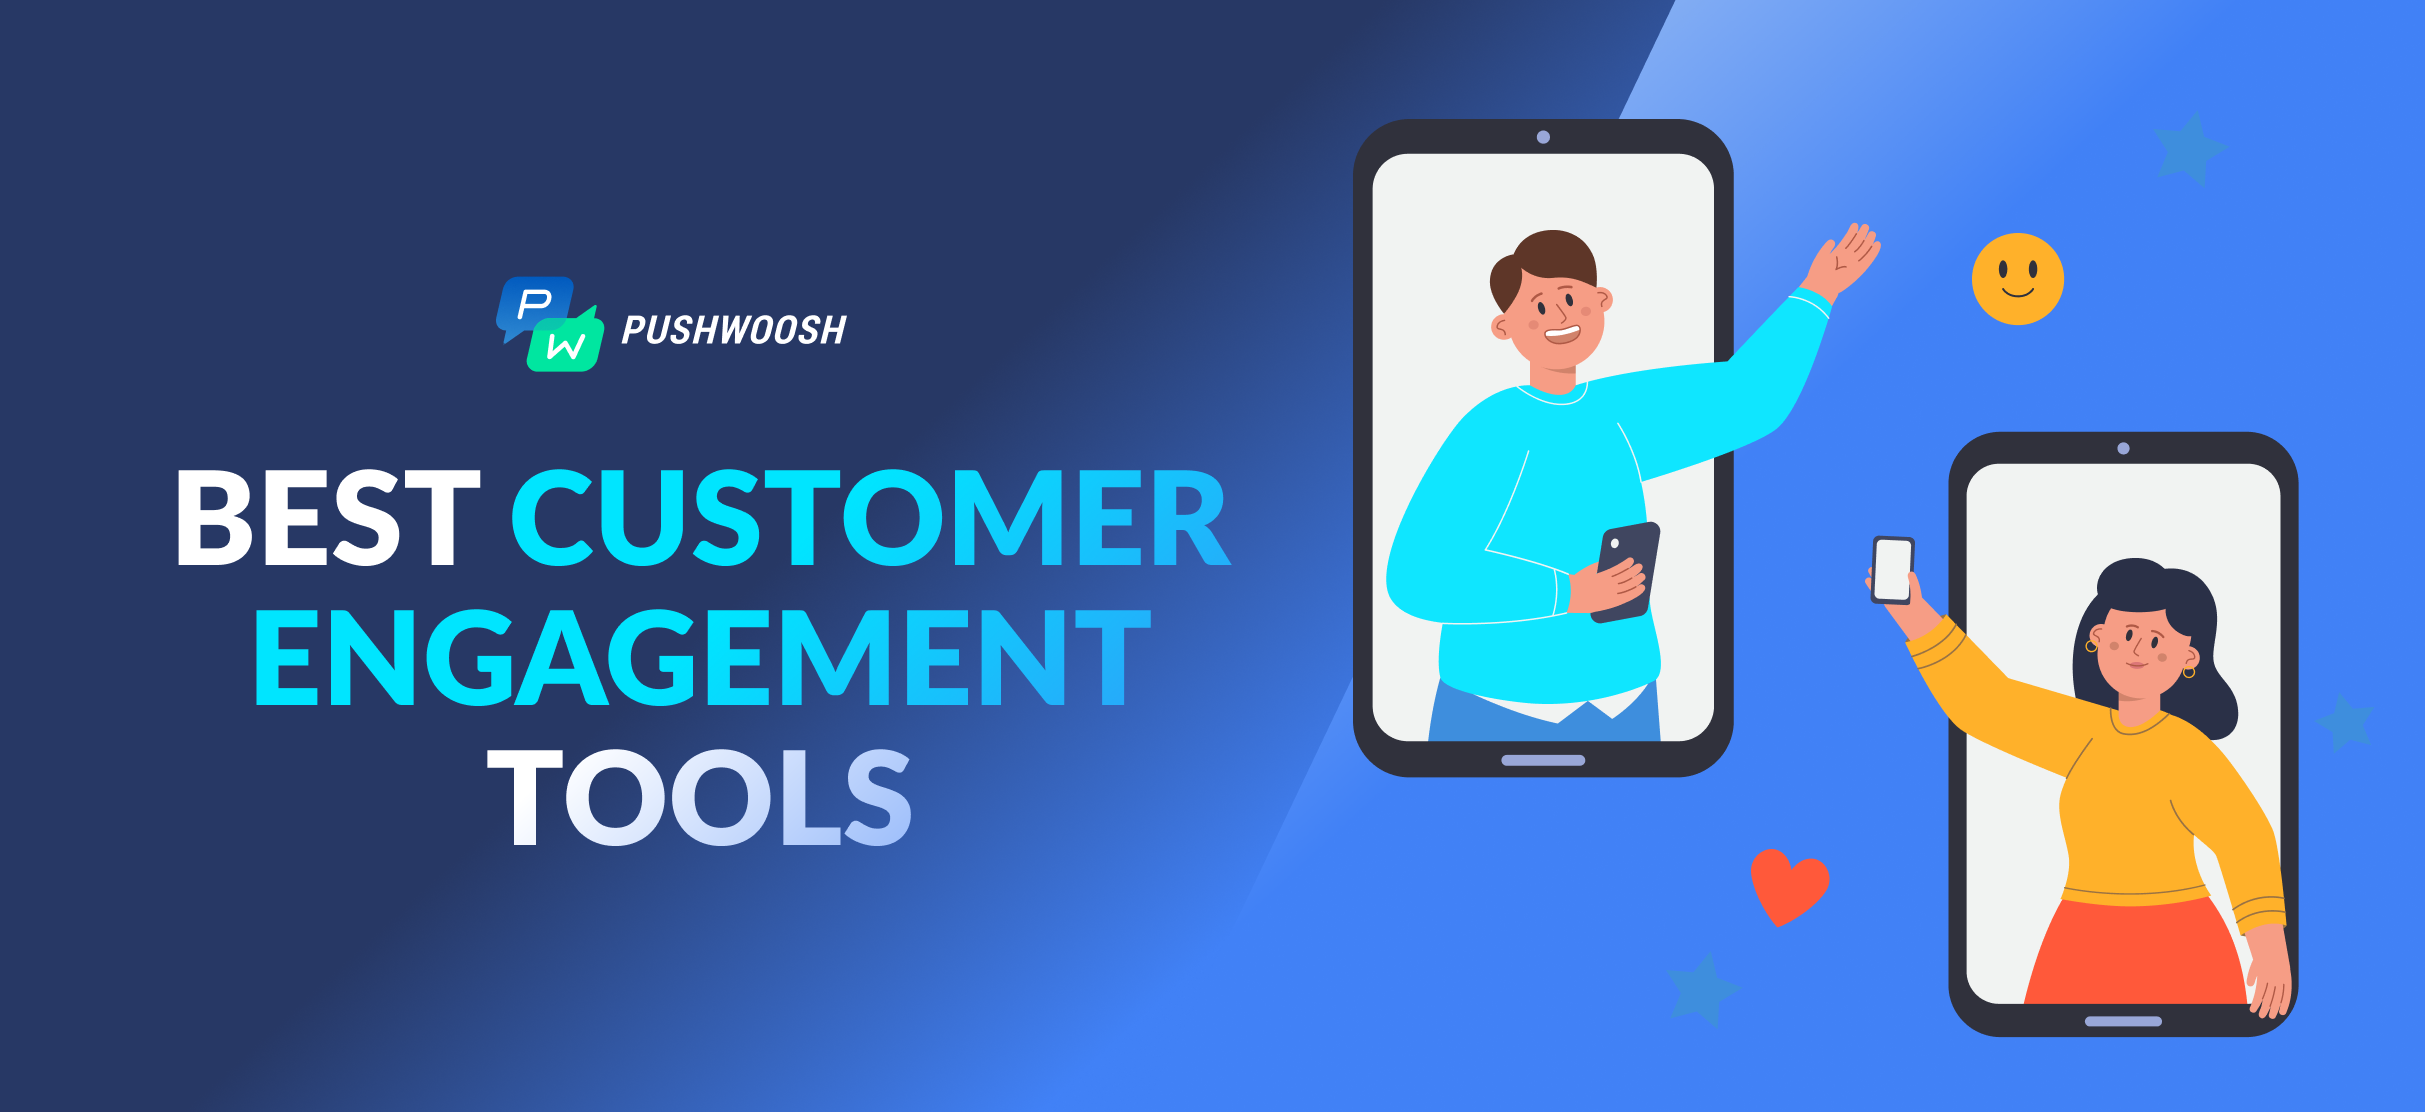 The Best Customer Engagement Tools to Boost Your Marketing Performance